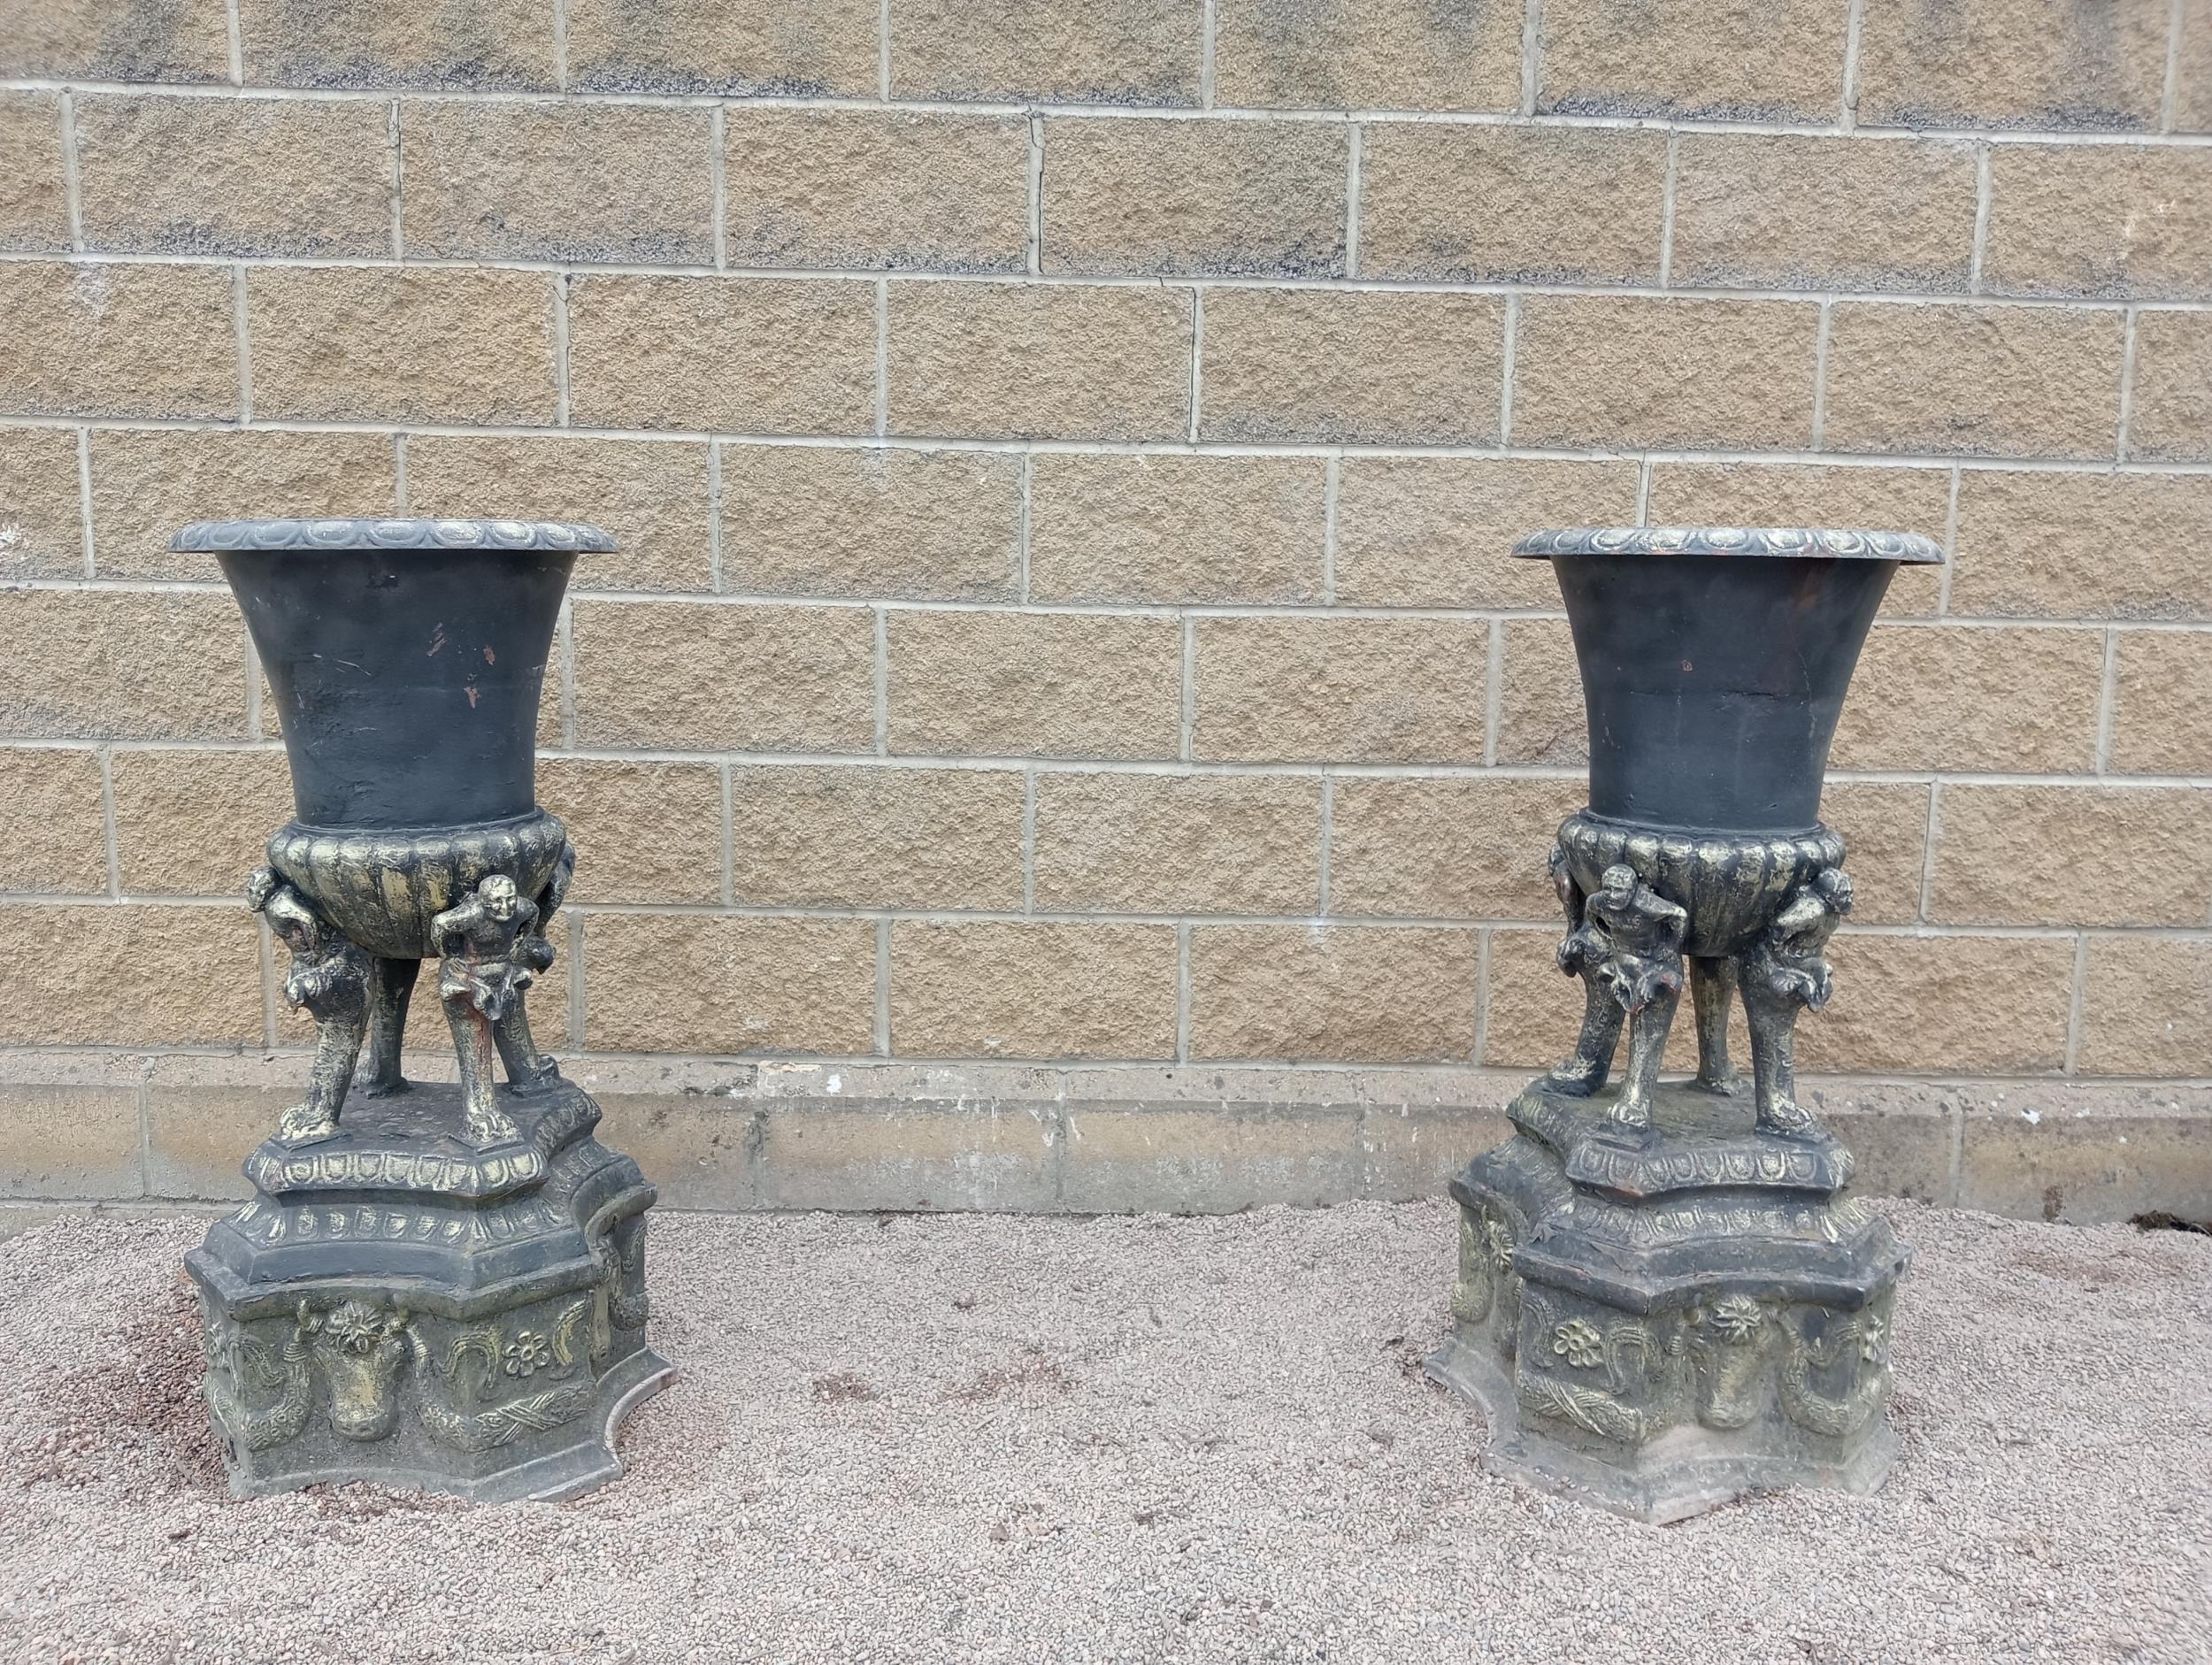 Pair of cast iron urns {H 110cm x W 46cm x D 46cm }. (NOT AVAILABLE TO VIEW IN PERSON)